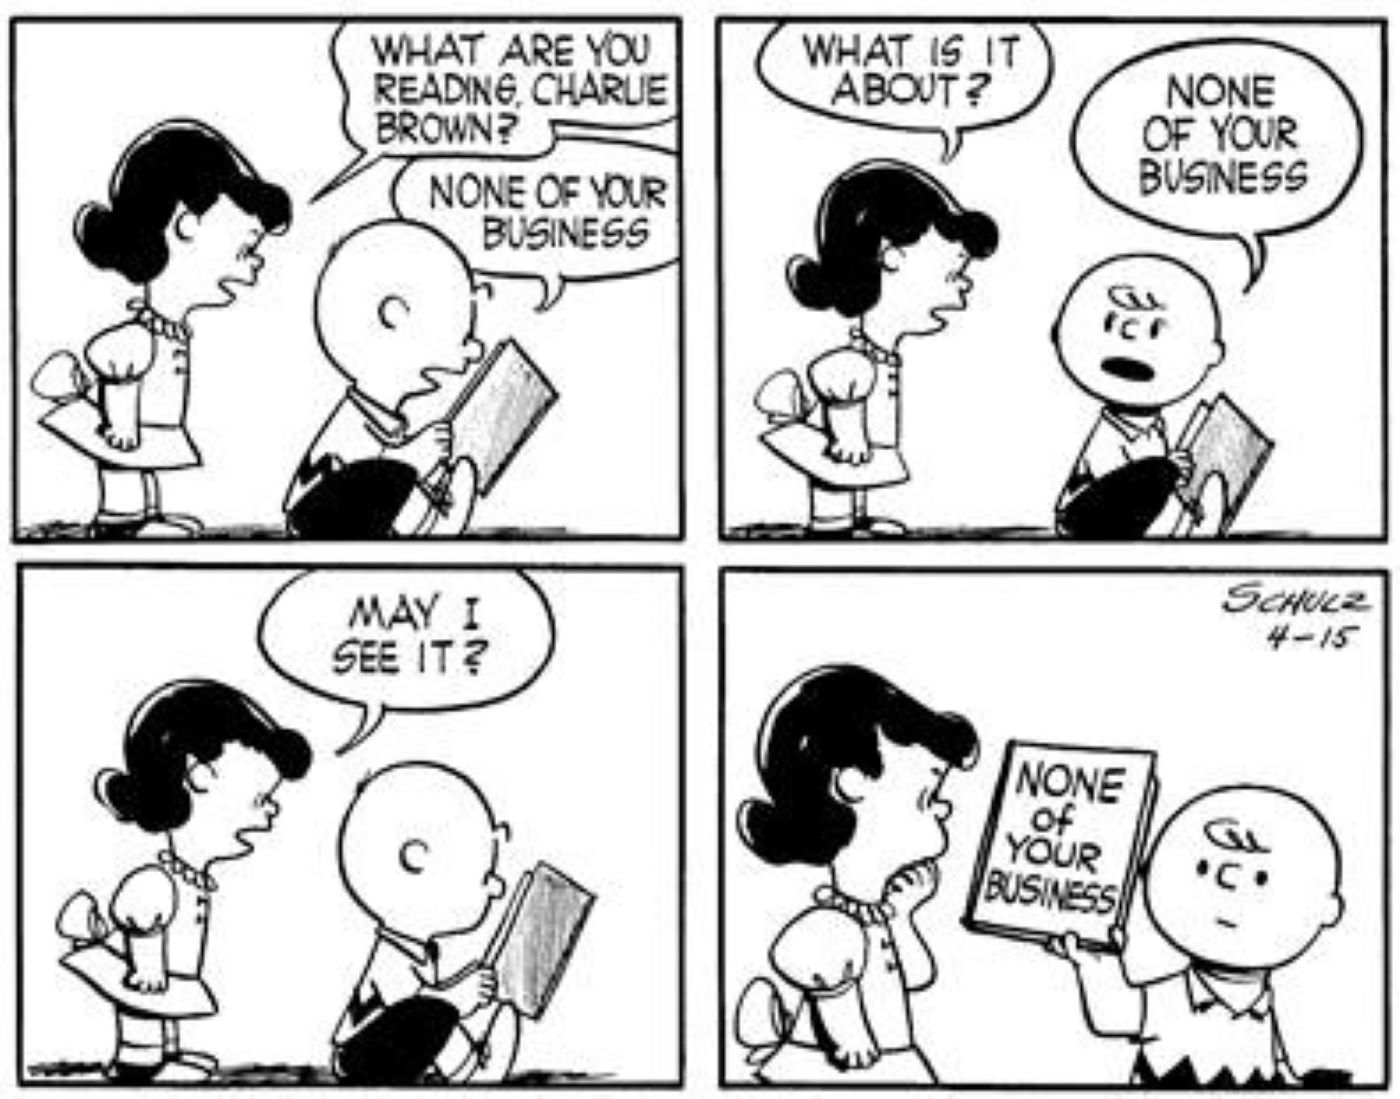 Charlie Brown tells Lucy to mind her own business